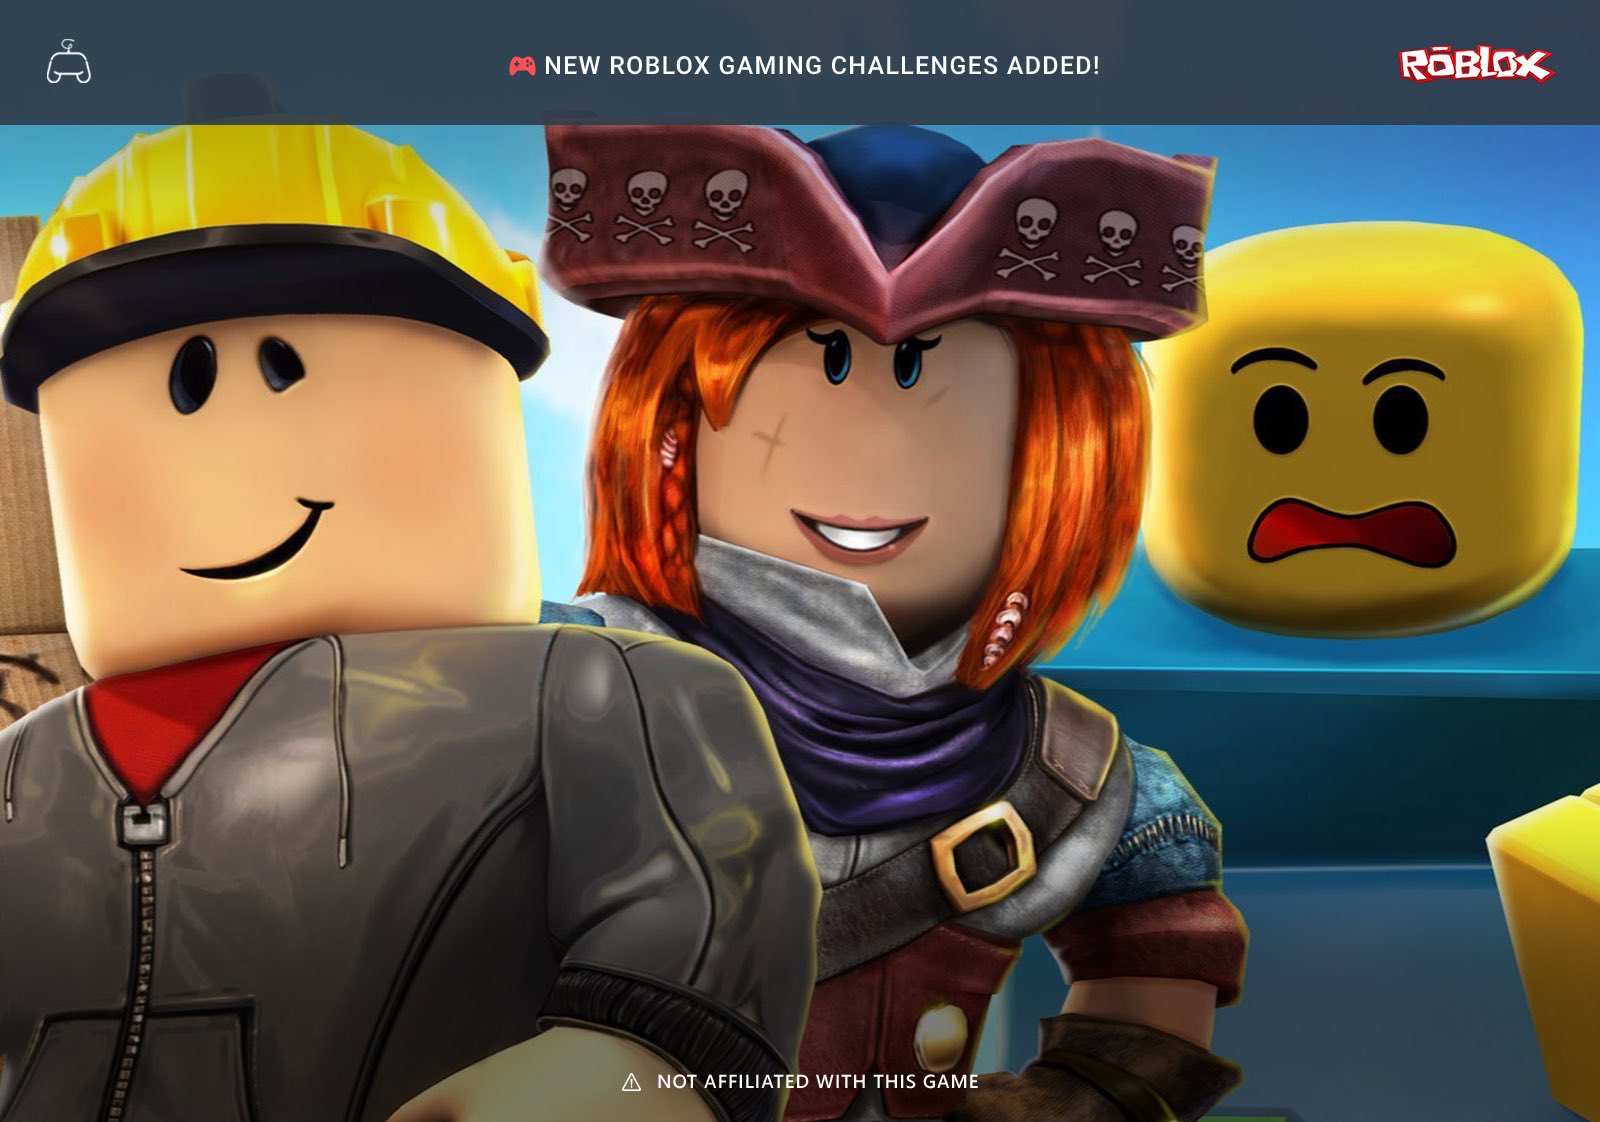 Glitch On Twitter Our New Weekly Roblox Gaming Challenges Have Been Added Click The Link Below To Check Them Out Roblox Glitchchallenge Https T Co Scupey76qp Join The Glitch Community Https T Co Vlvhekgmor Https T Co 6zh4w5al8u - glitch roblox character